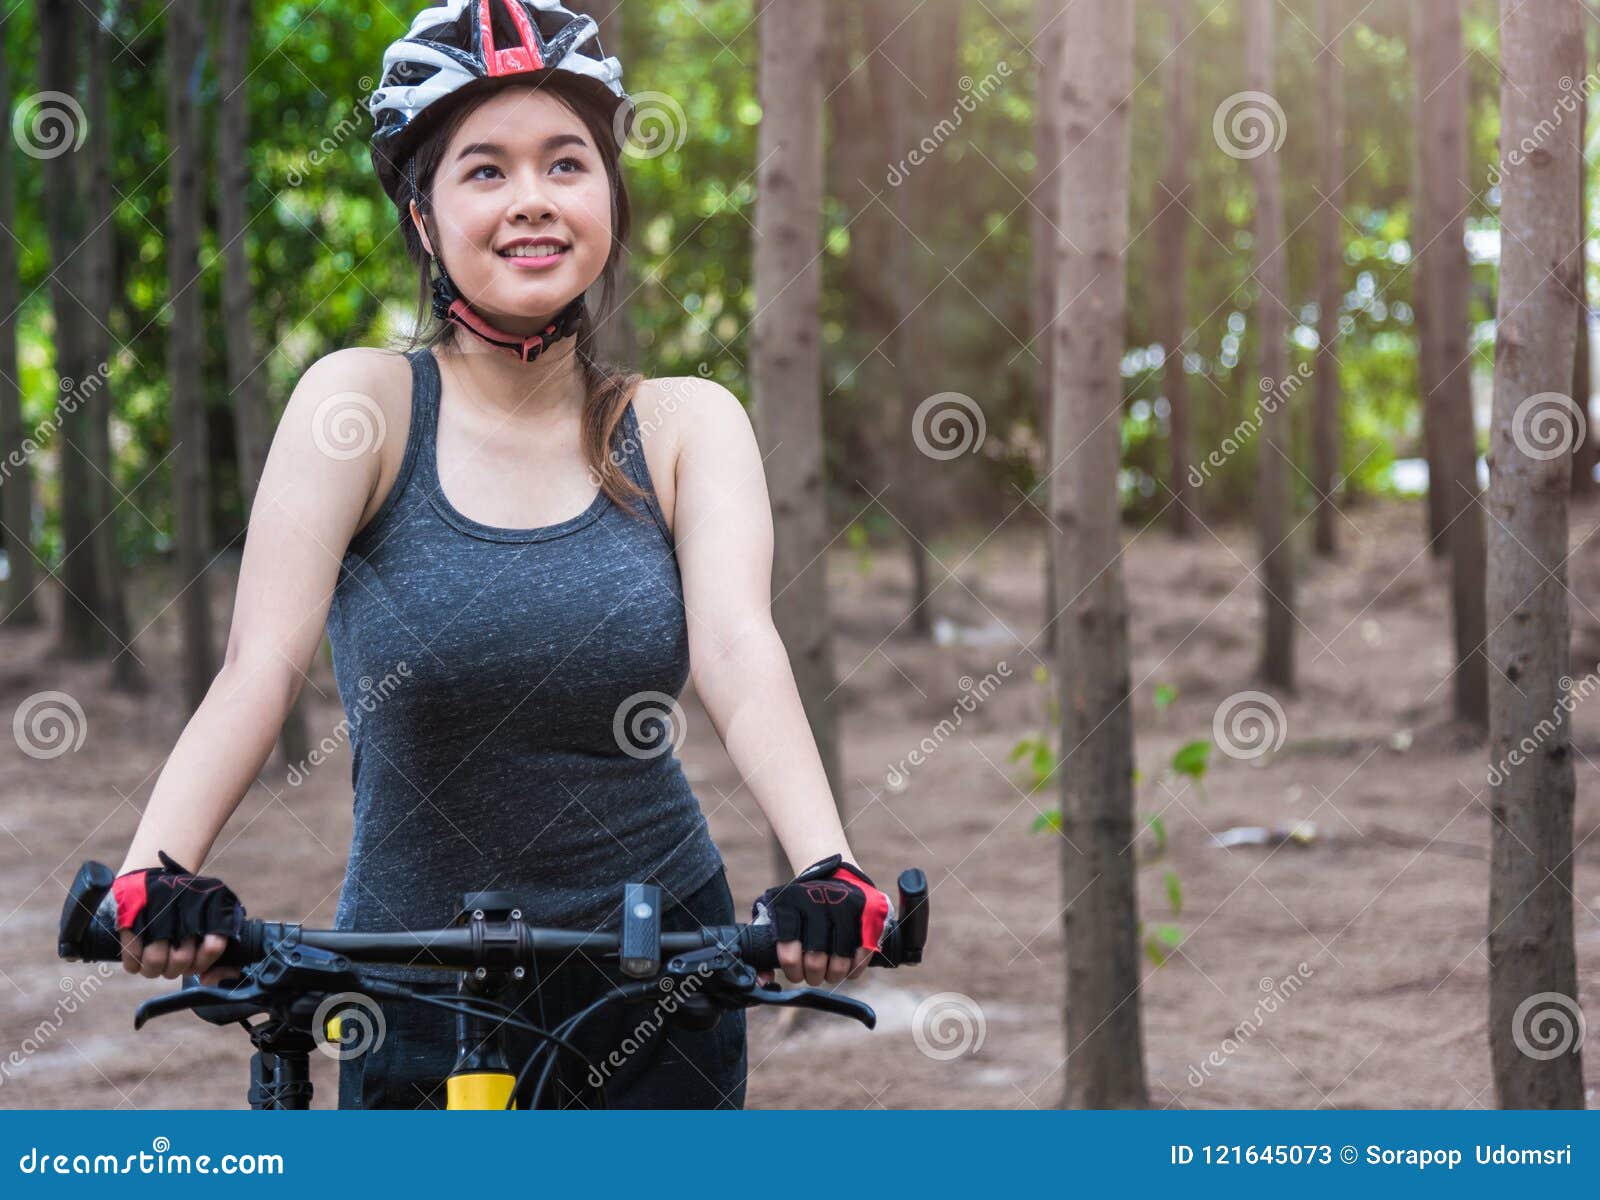 beautiful young female woman helmet activity bicycle